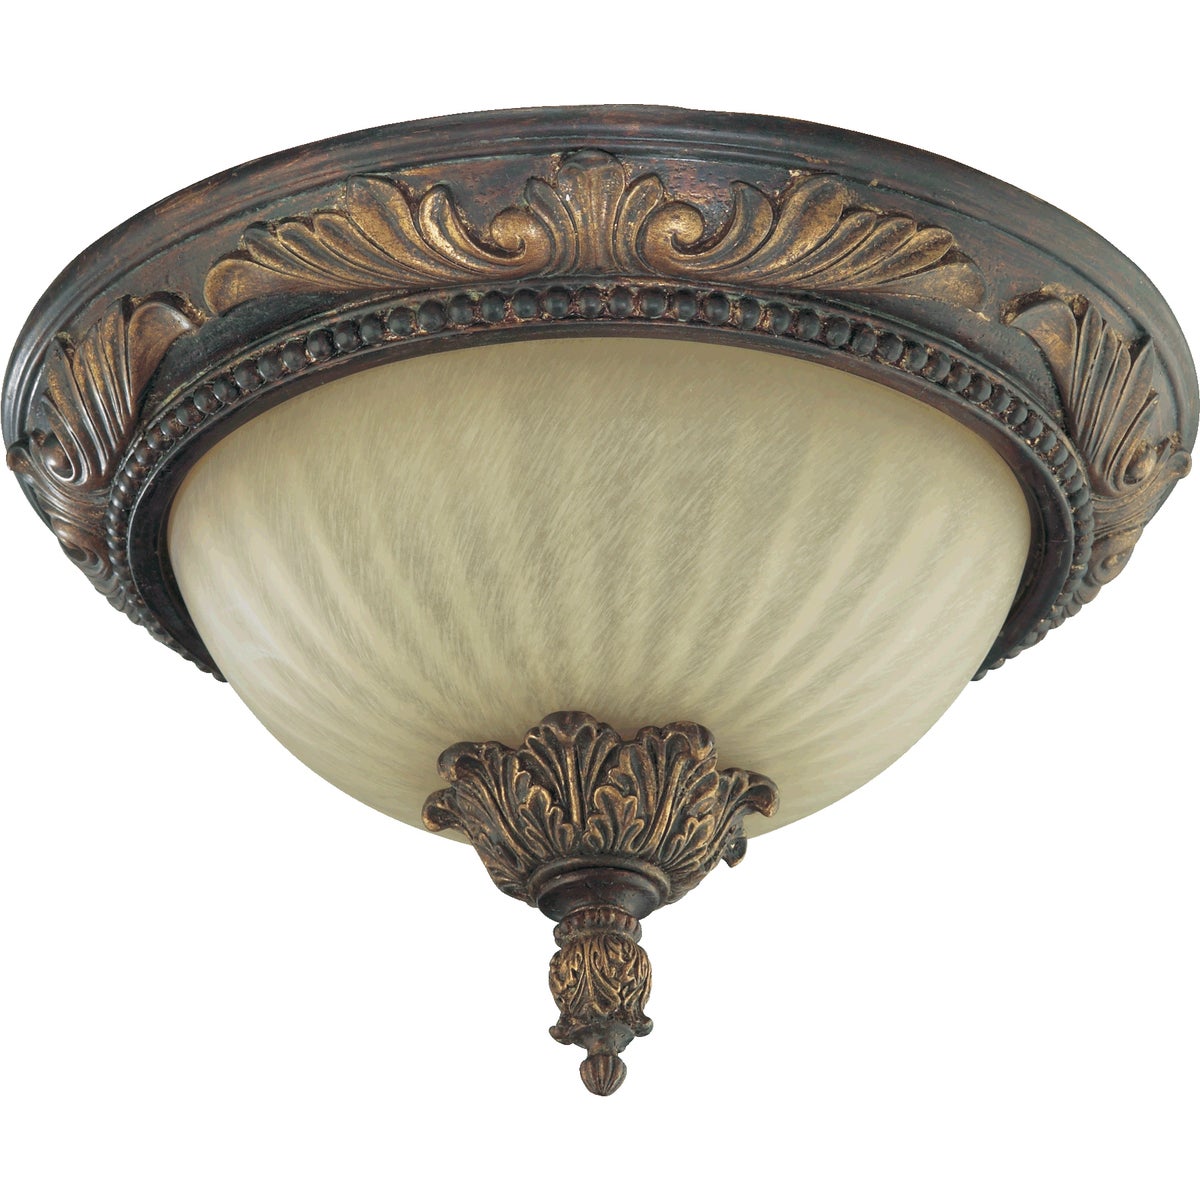 Traditional Flush Mount Light with corsican gold finish, showcasing ornate wood and bronze detailing. Cast structure, 2 bulbs, 60W, 120V. UL Listed, Damp Location. 13.5&quot;W x 8.75&quot;H.